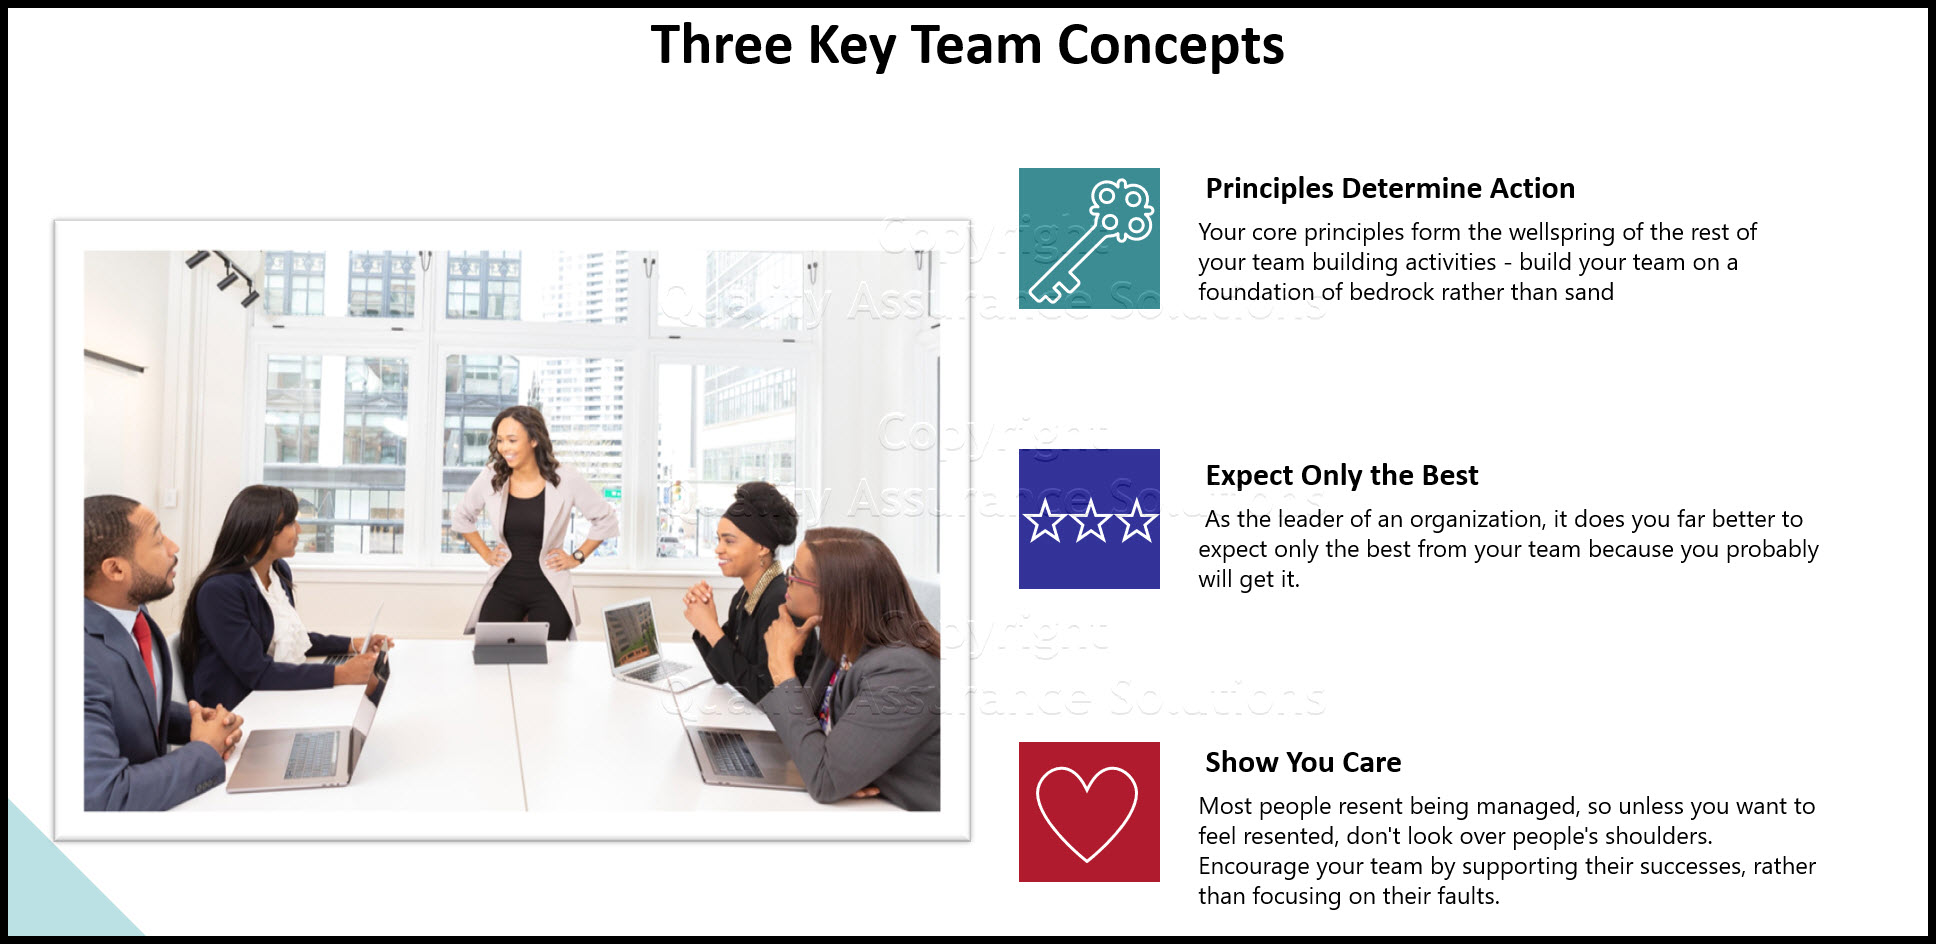 Three simple team building concepts that determine whether your team succeeds or fails.